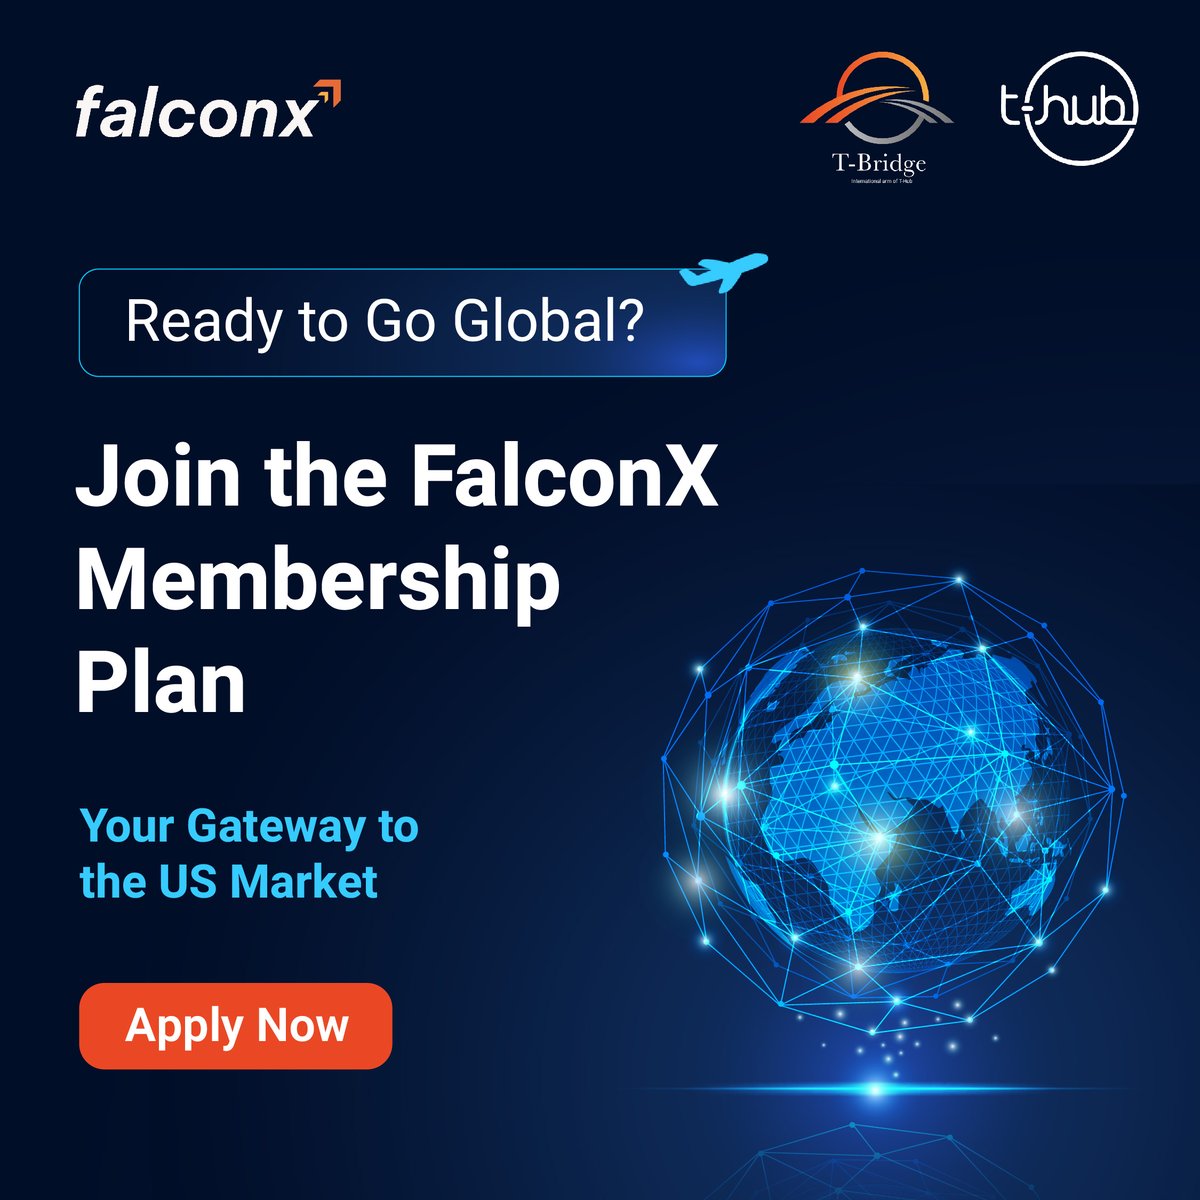 T-Hub is thrilled to reintroduce the FalconX Membership Plan, a unique #accelerator opportunity with FalconX, for #startups seeking to expand their business globally. Get a #global presence with access to #coworking spaces in #SiliconValley. Apply: bit.ly/3RKtzpe